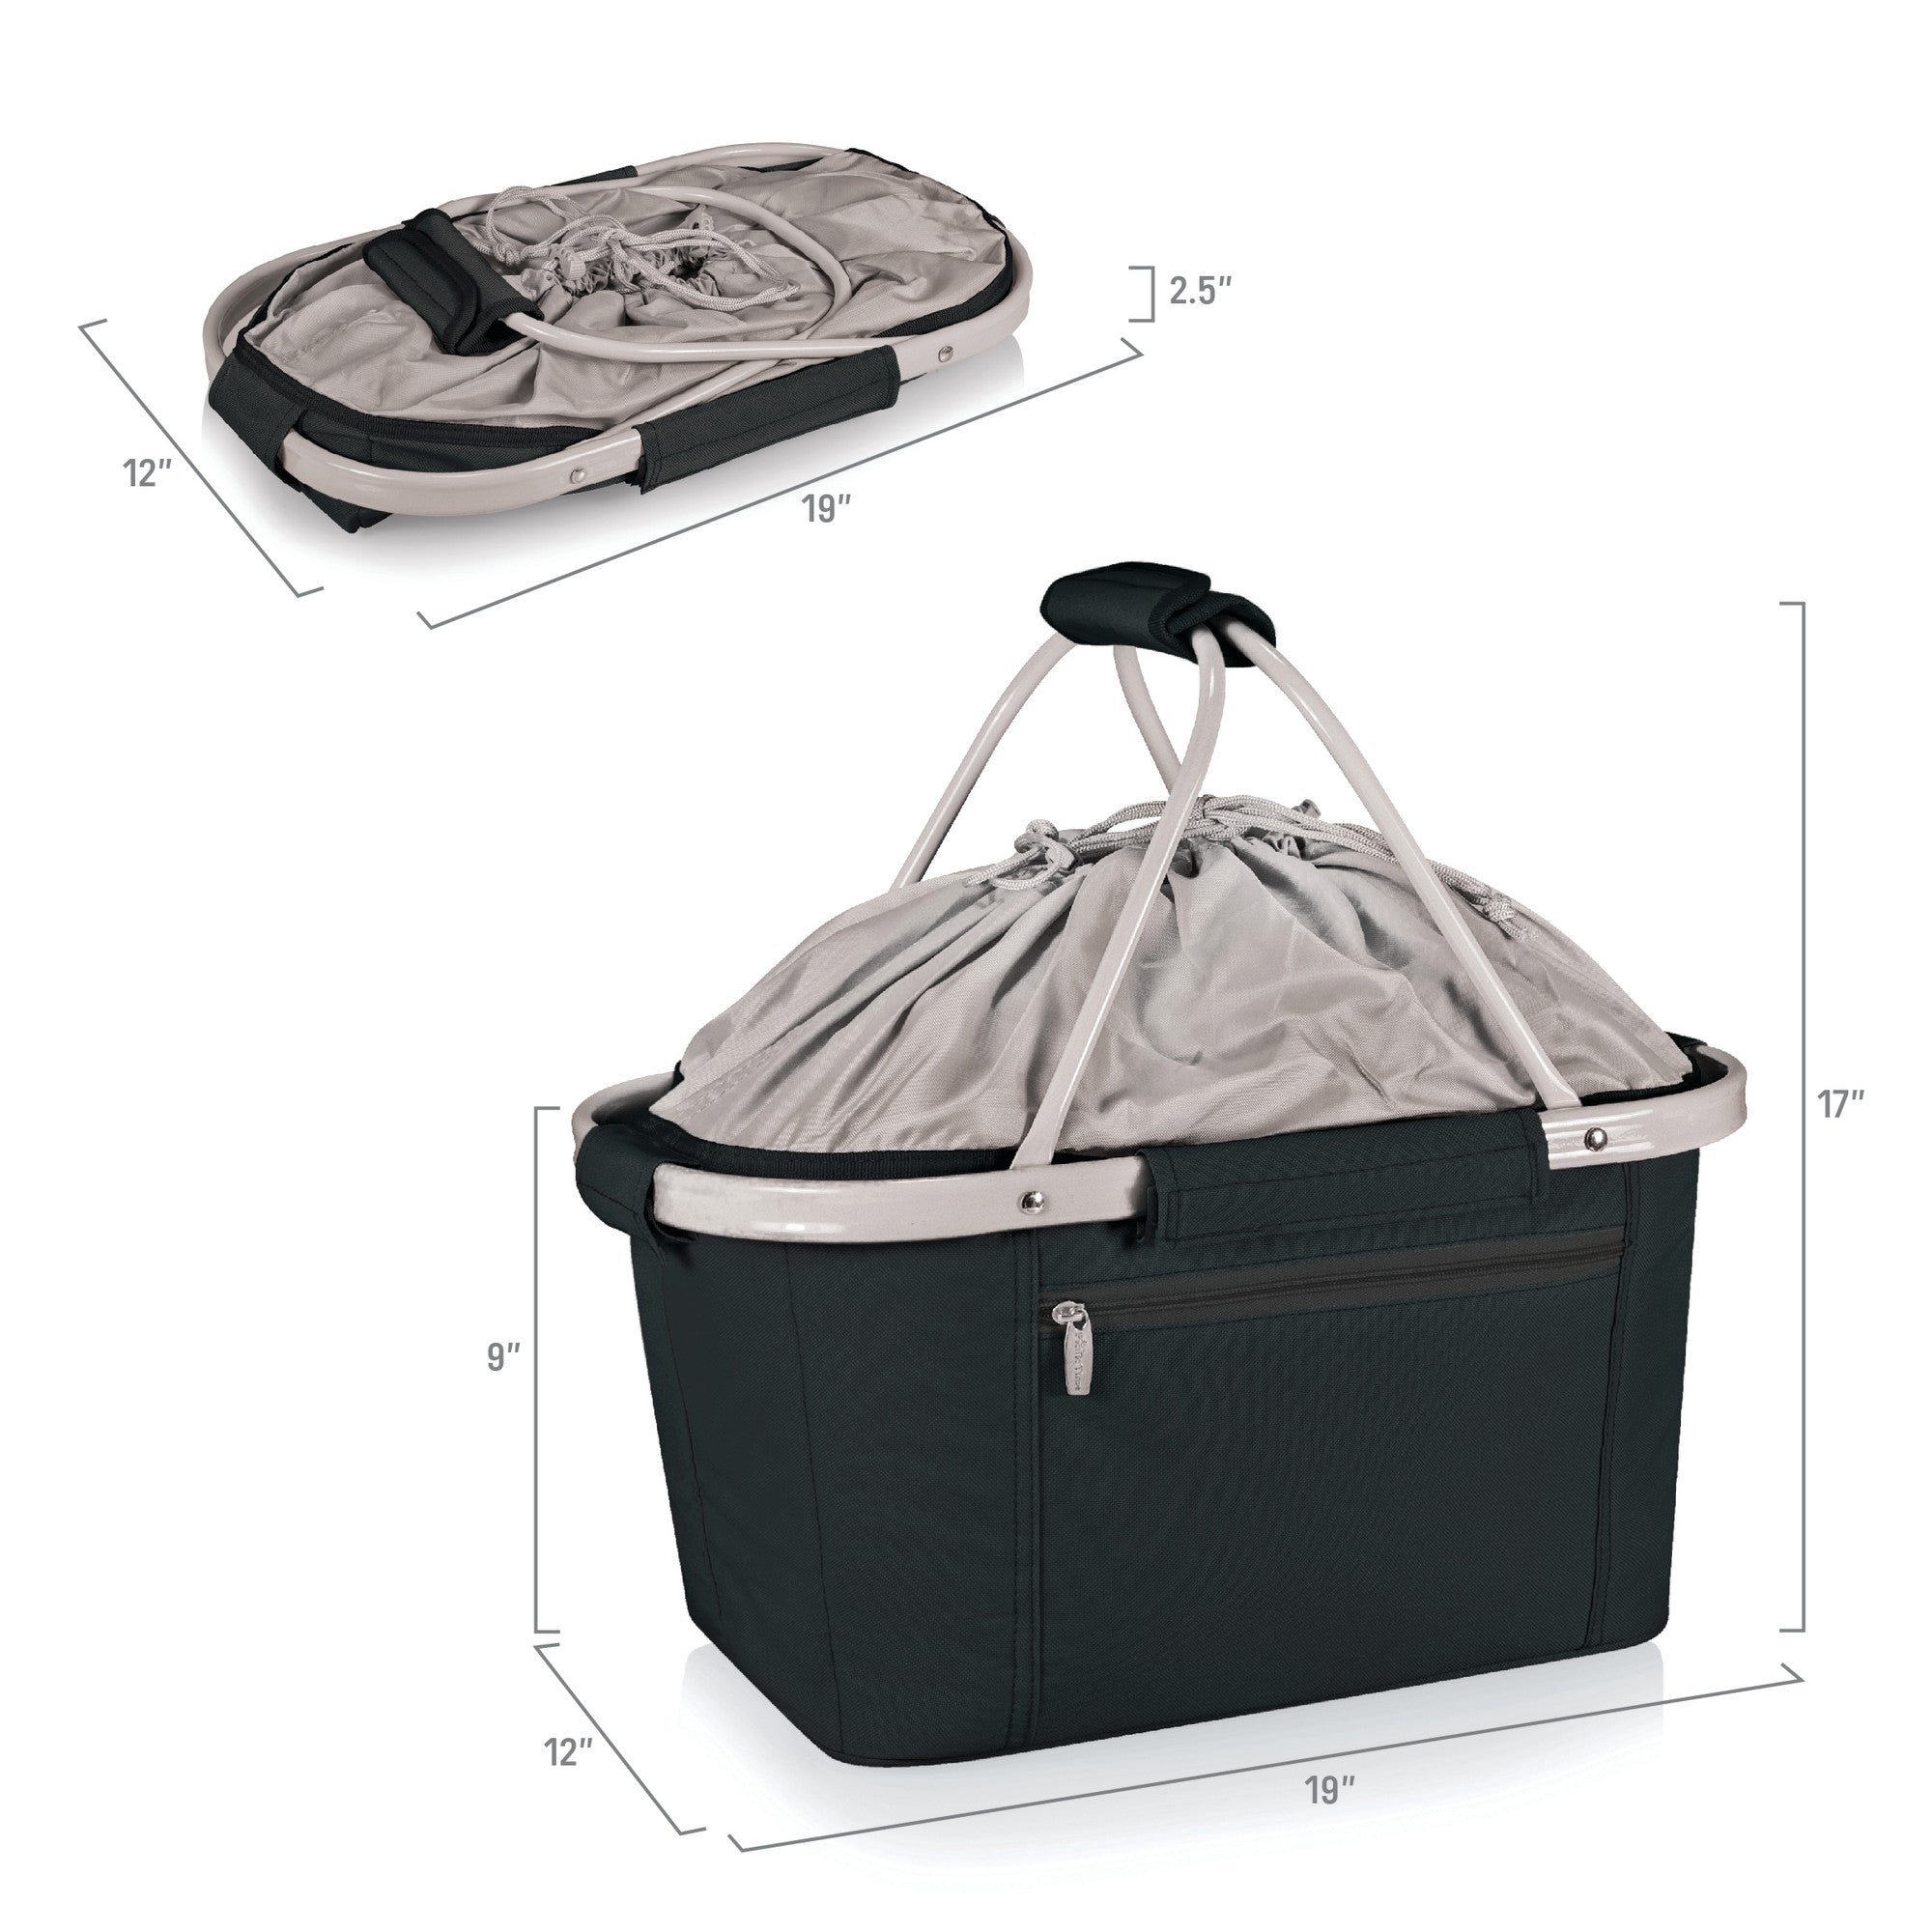 Ohio State Buckeyes - Metro Basket Collapsible Cooler Tote